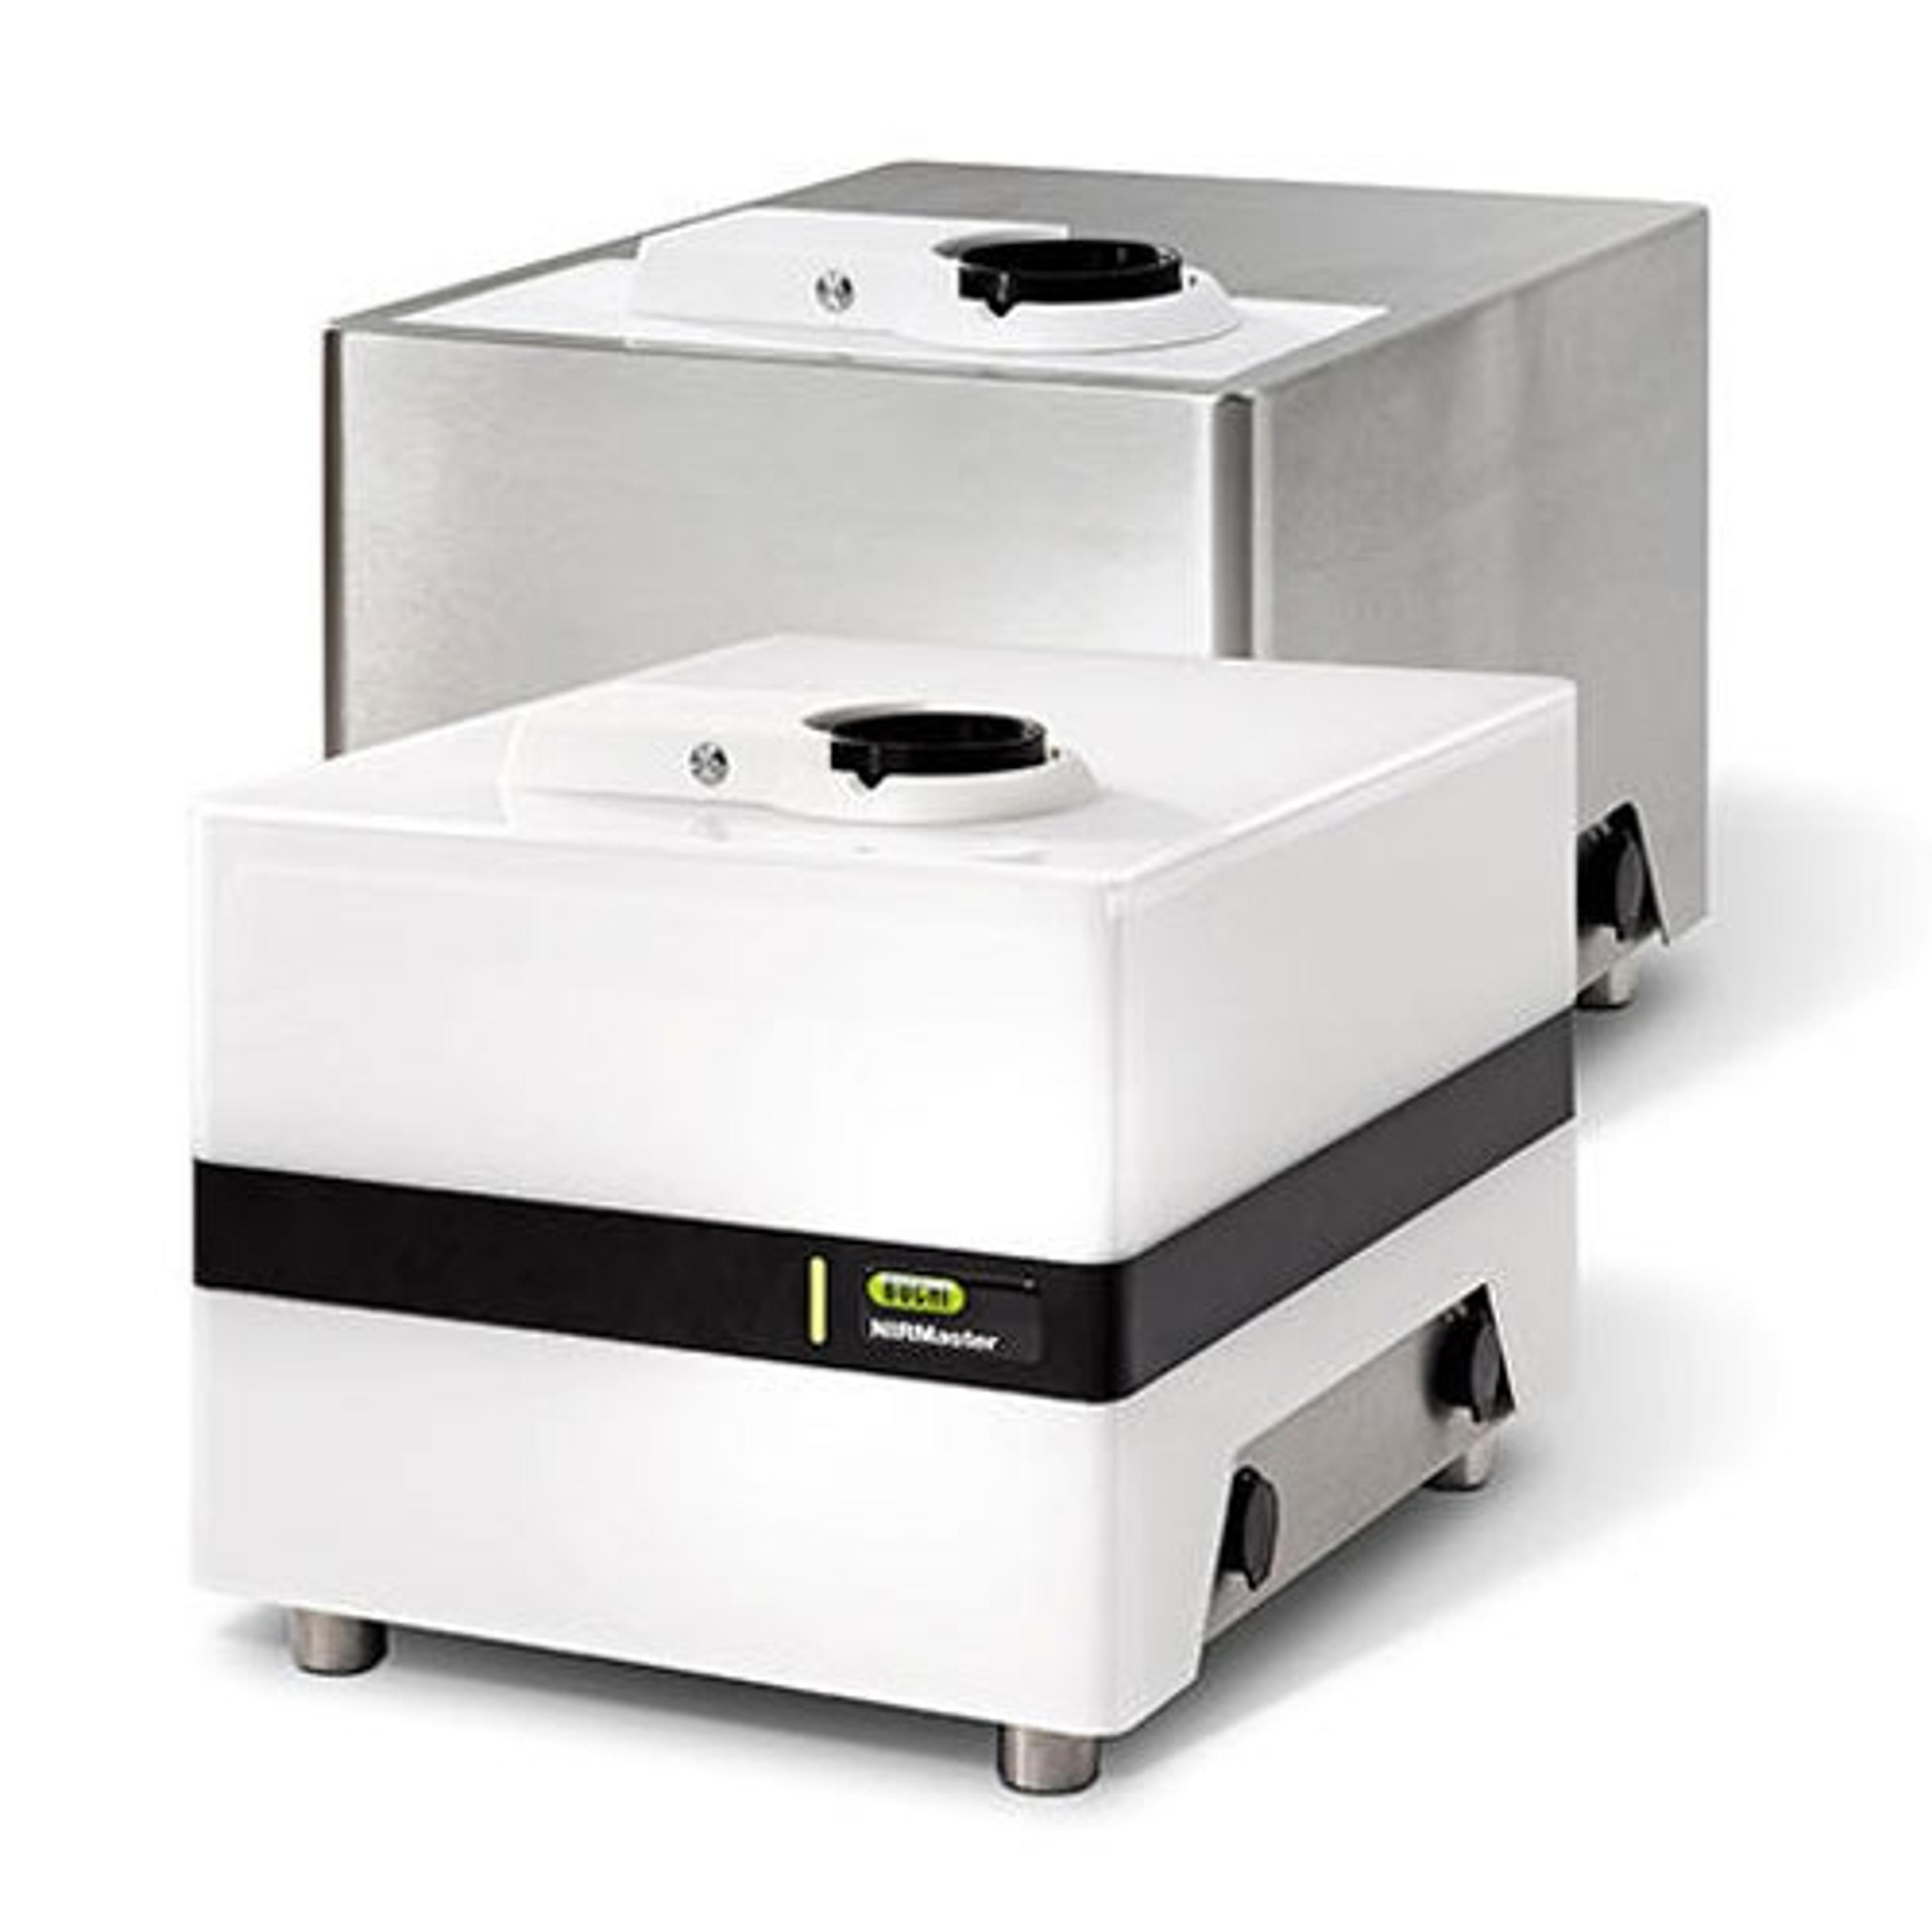 The NIRMaster offers maximal NIR precision for food control